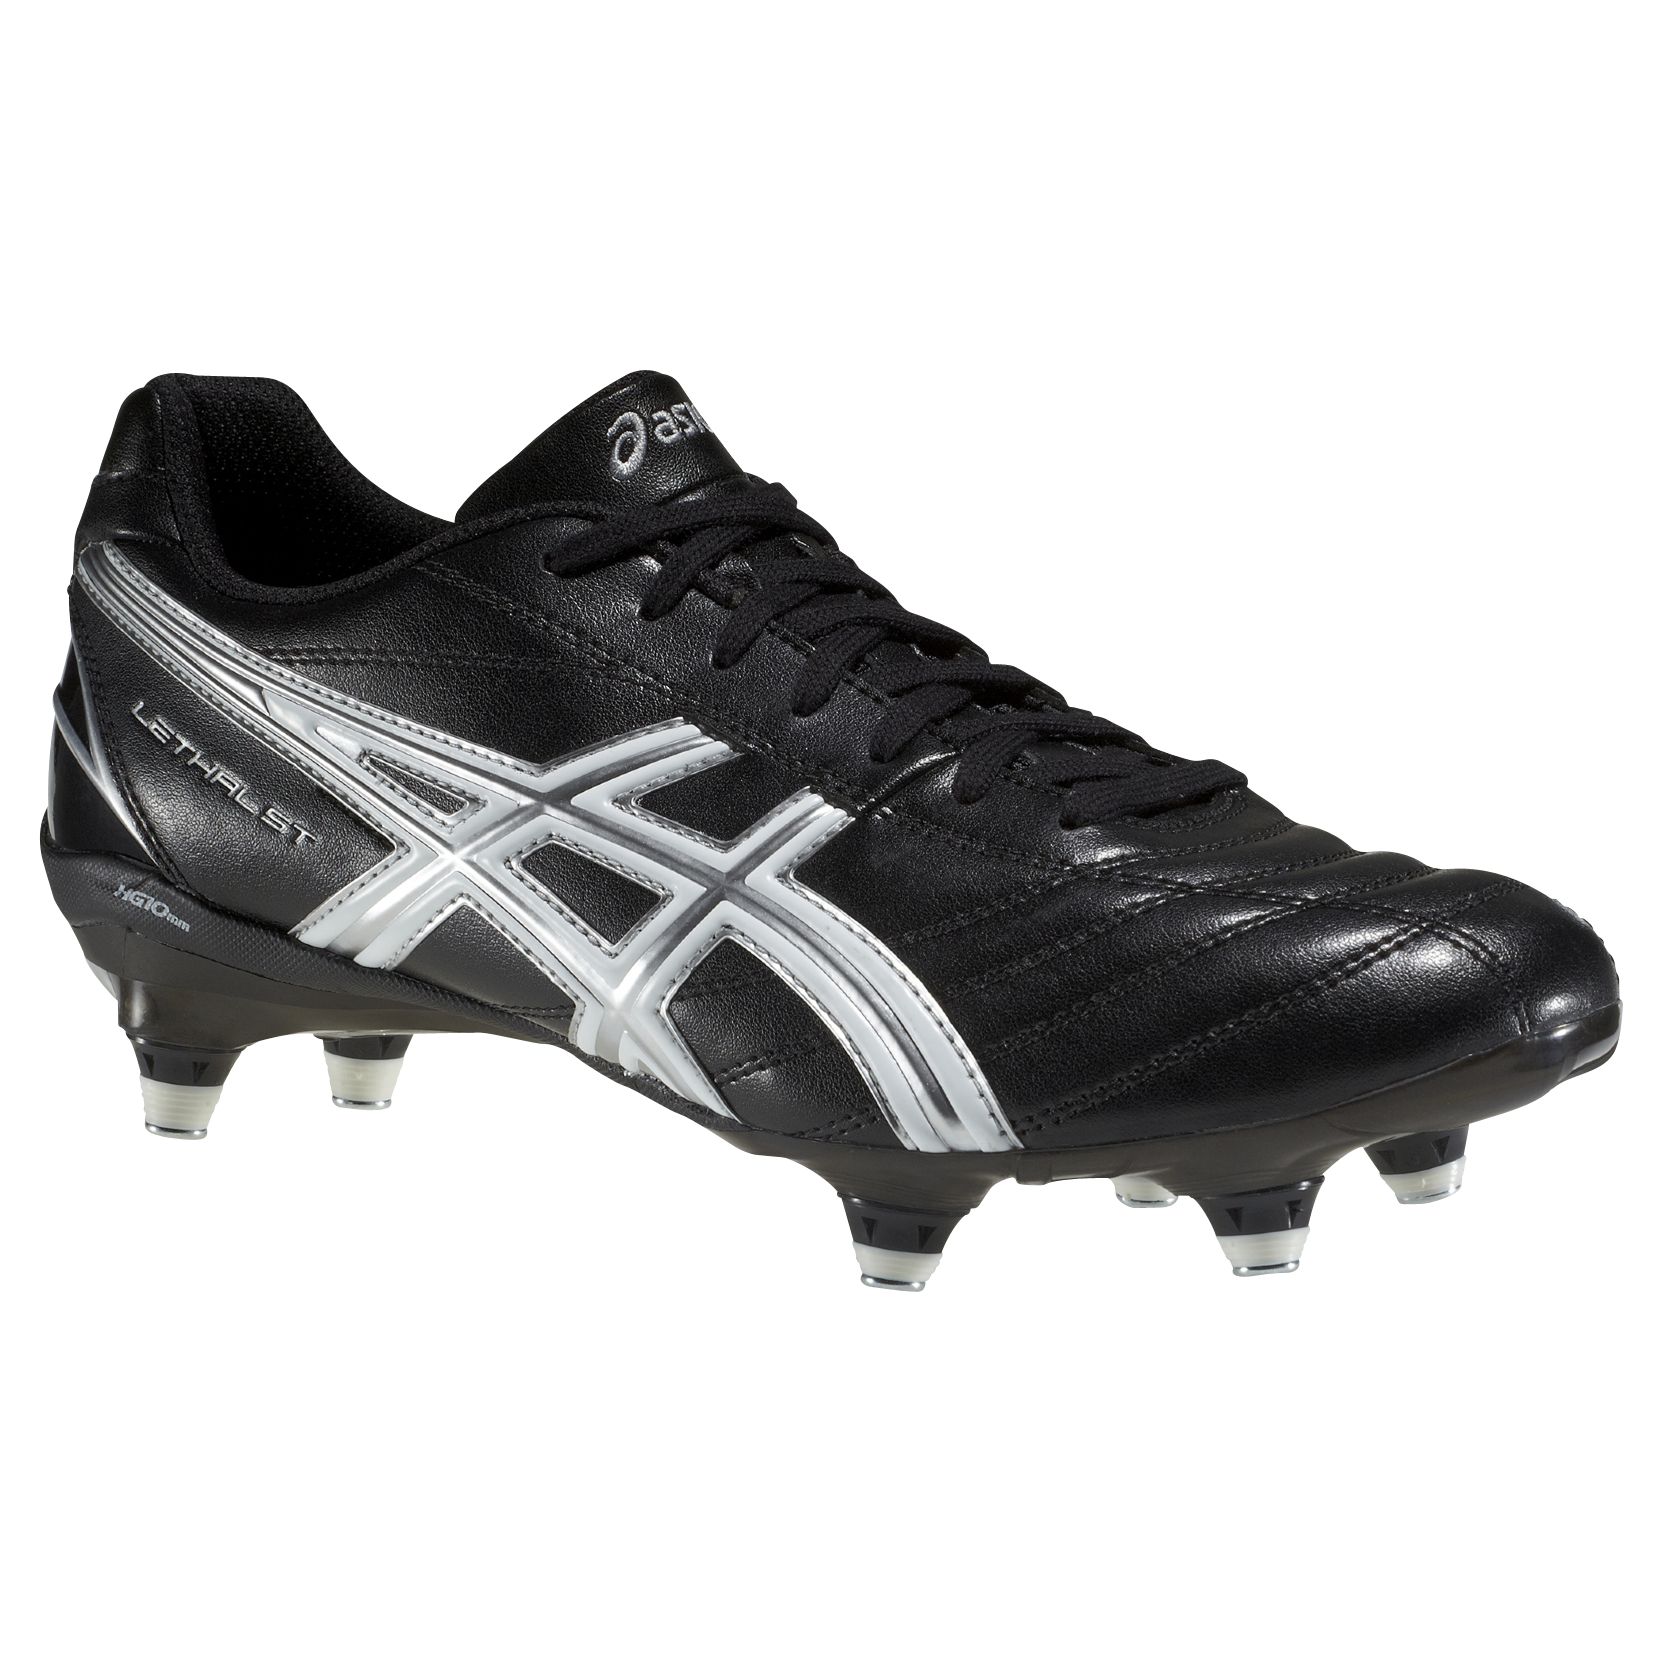 white asics rugby boots